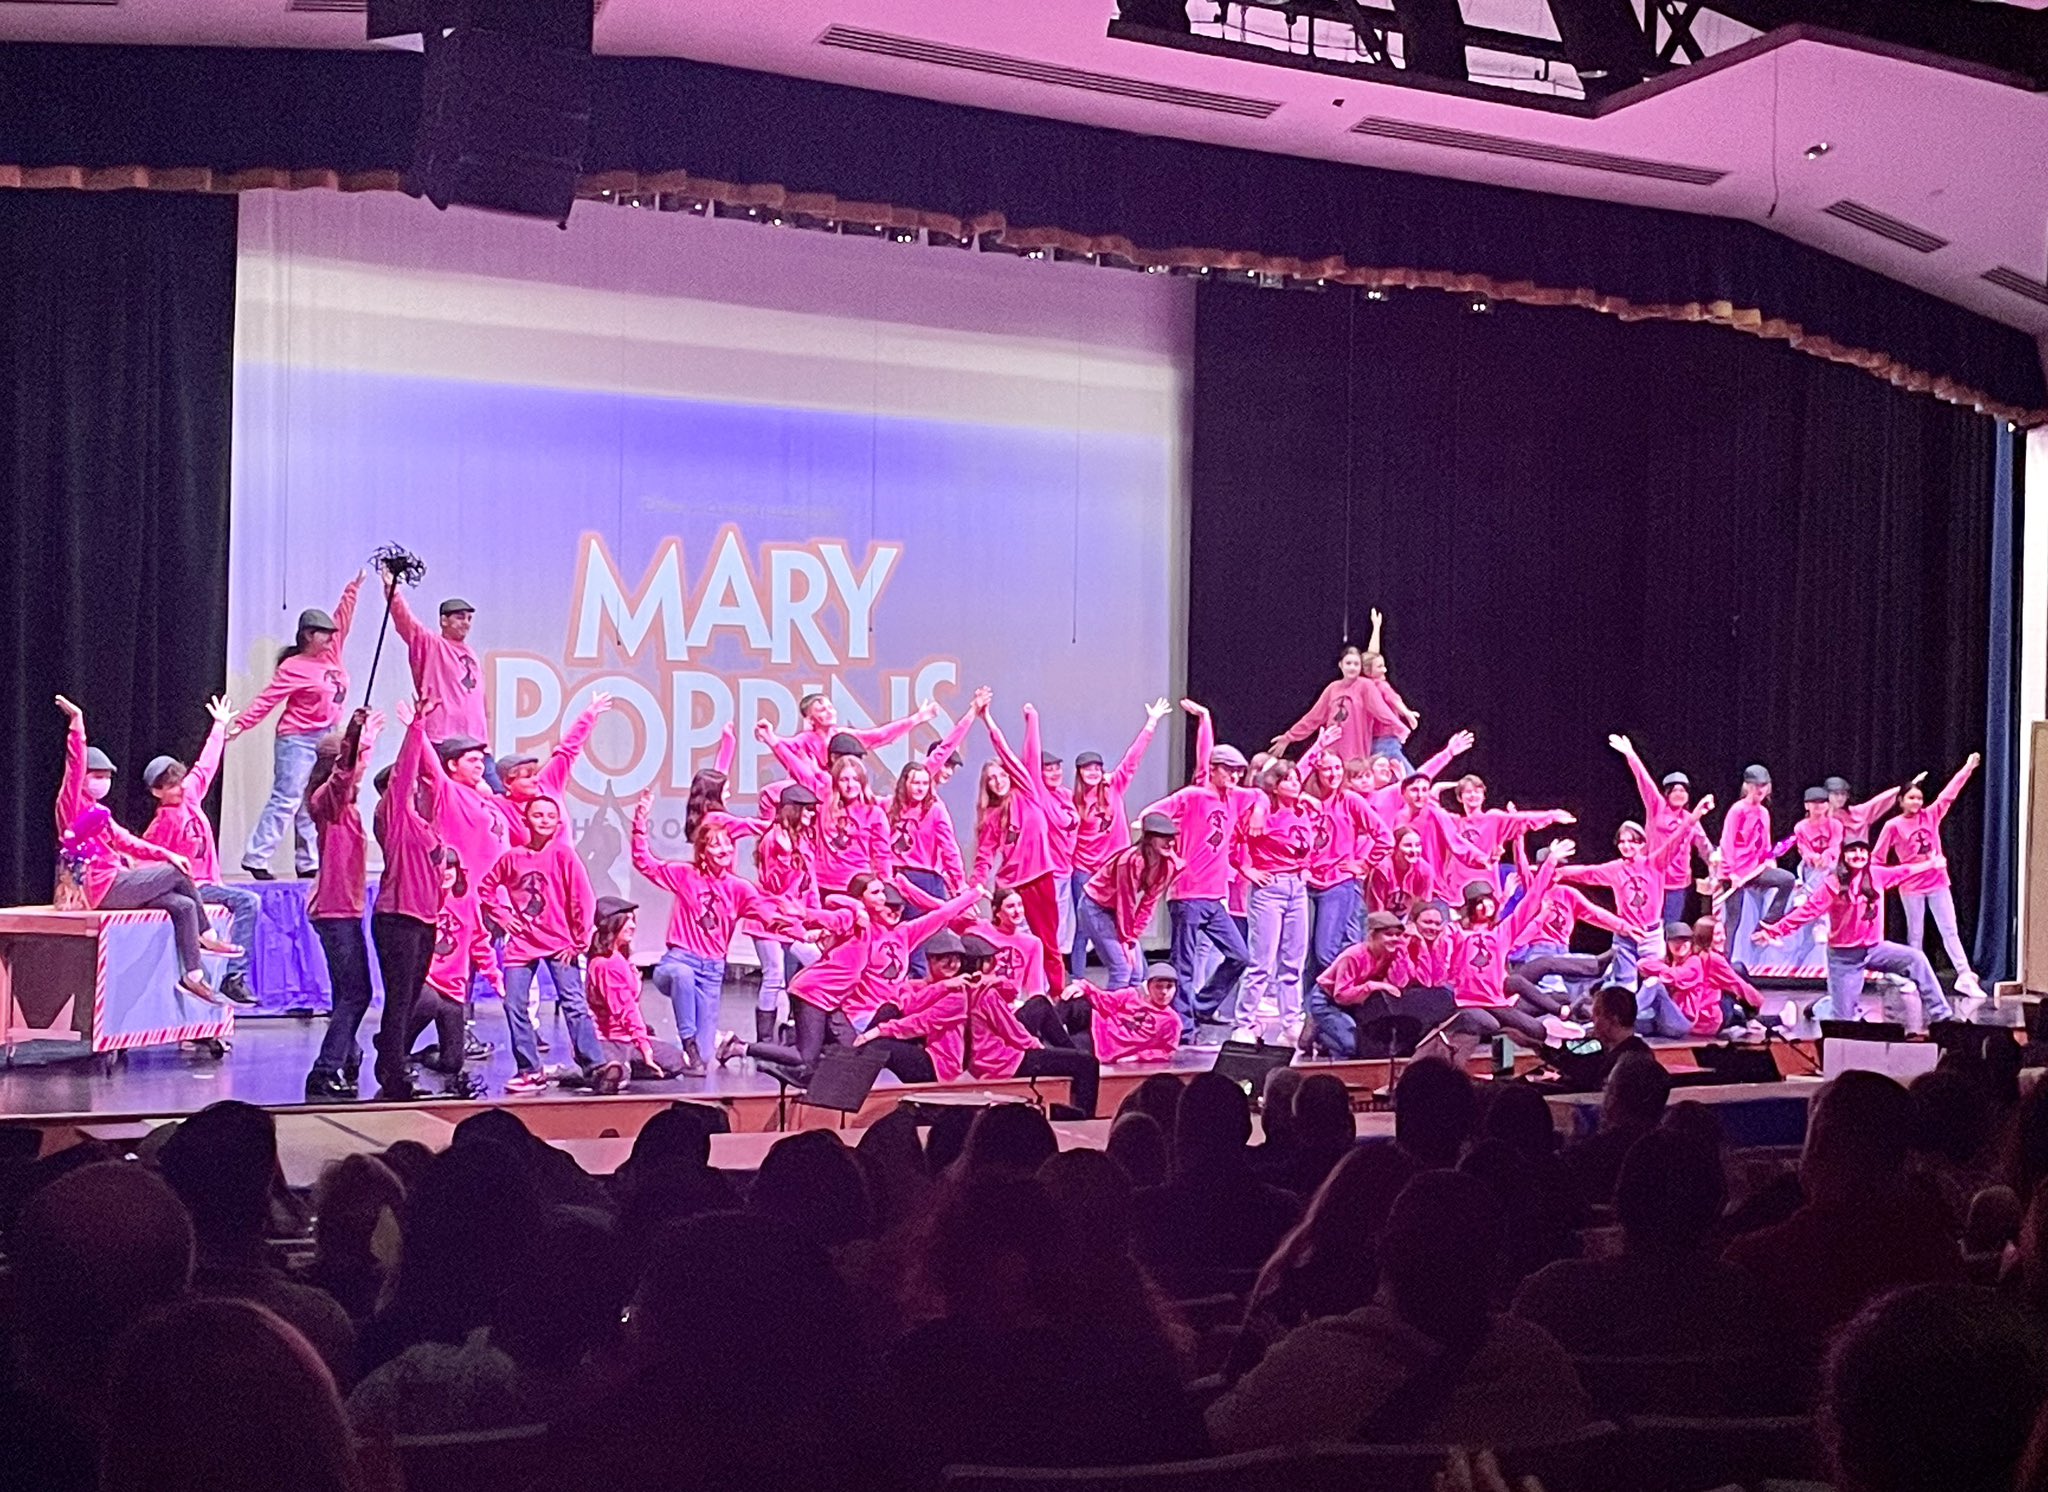 Tamanend Players on X: This tiny Mary Poppins stole some hearts when she  came to see OUR Mary Poppins lead our show w/ talent & intelligence…a  “practically perfect” performance. Kudos to our